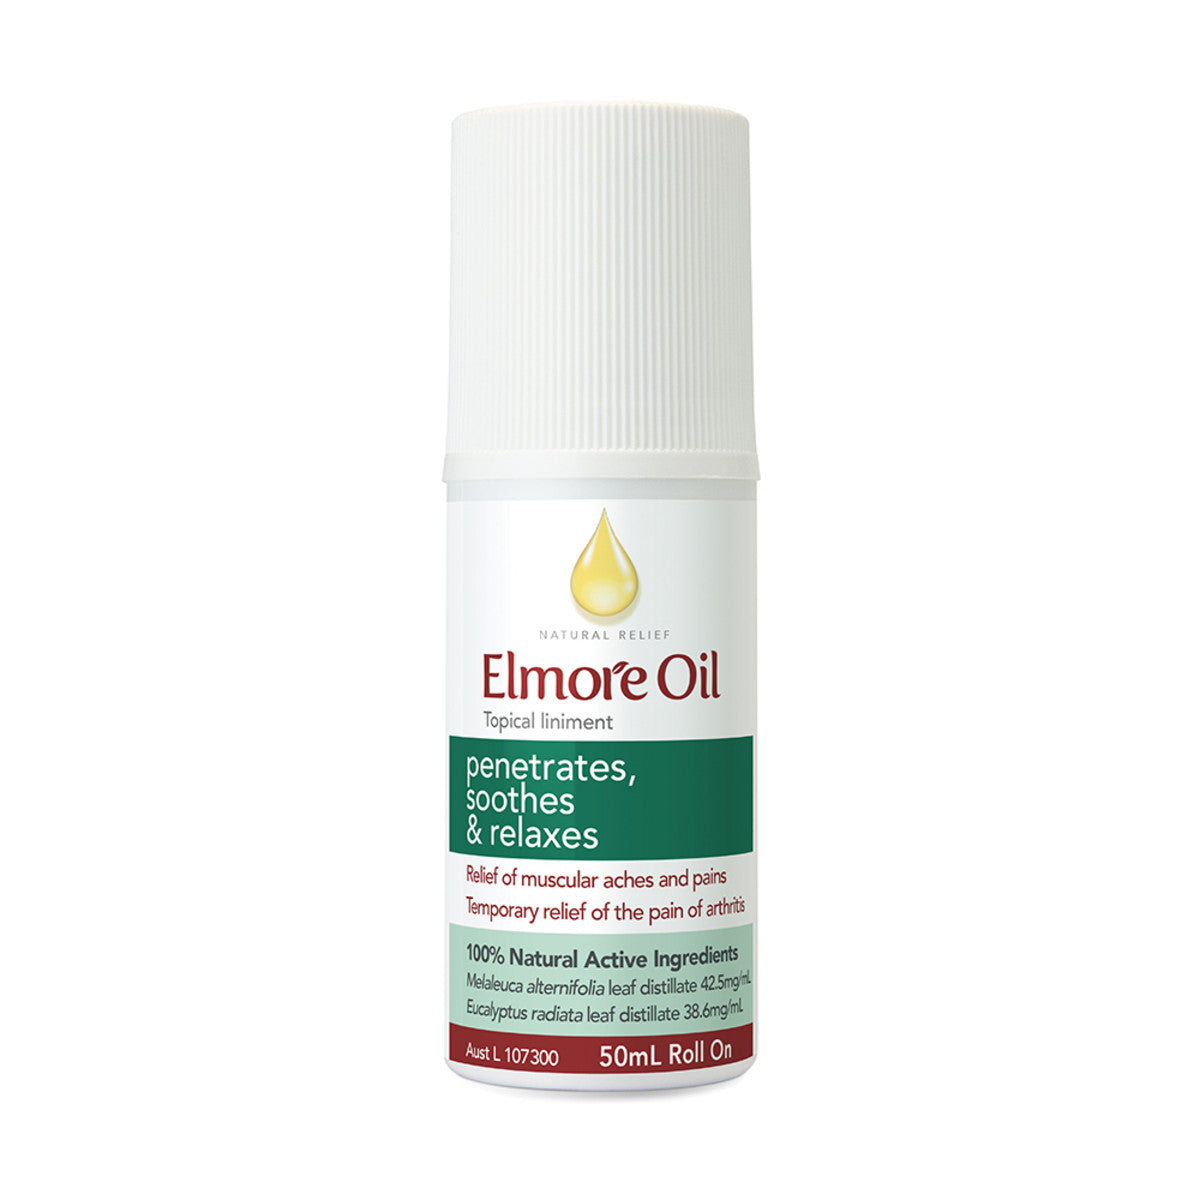 Elmore Oil - Natural Relief Topical Liniment Roll On